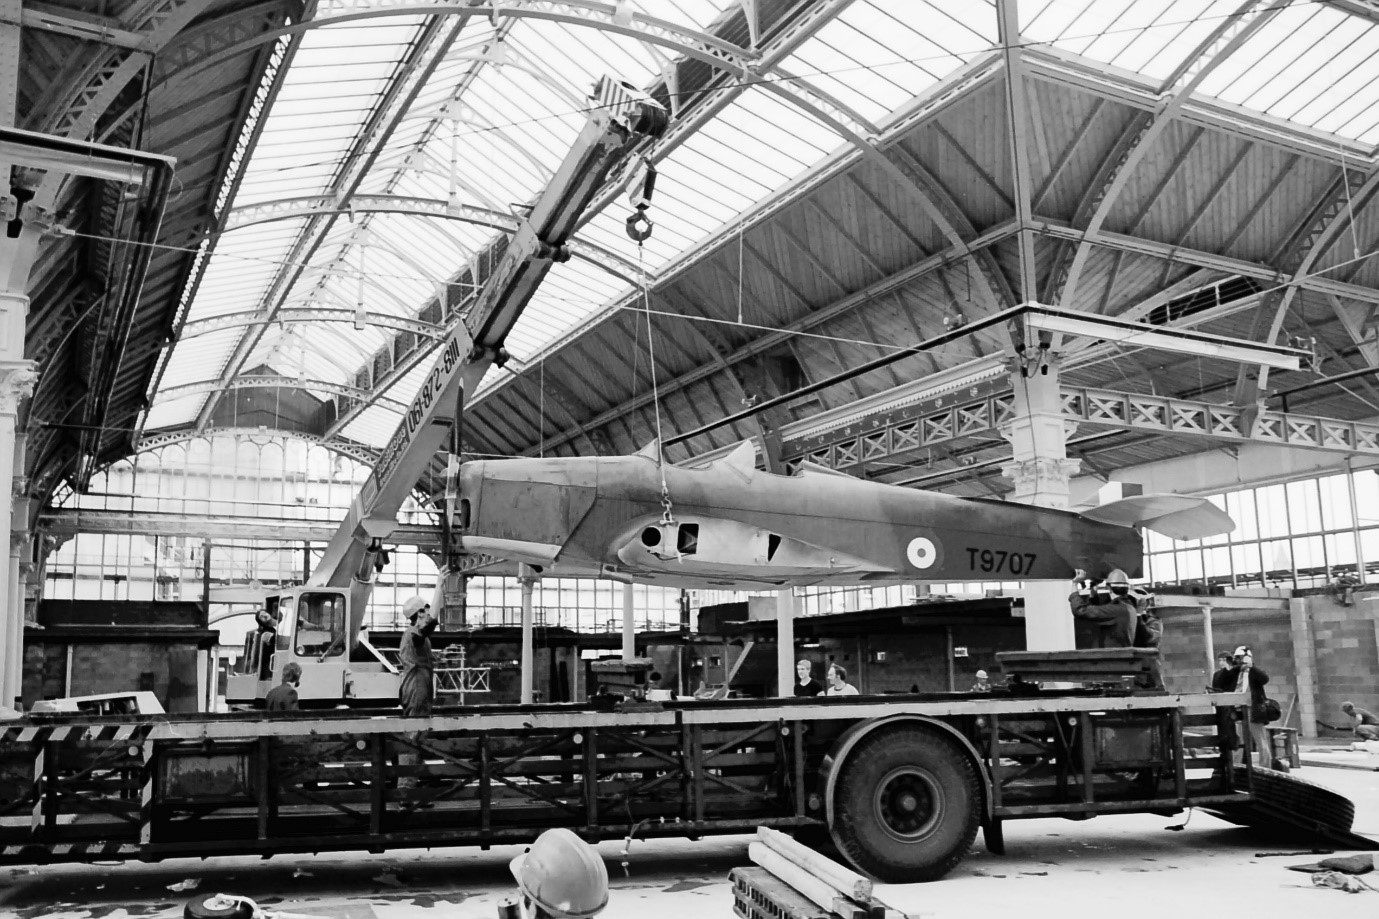 Black and white photo of a plane being hung from the ceiling of an old market hall